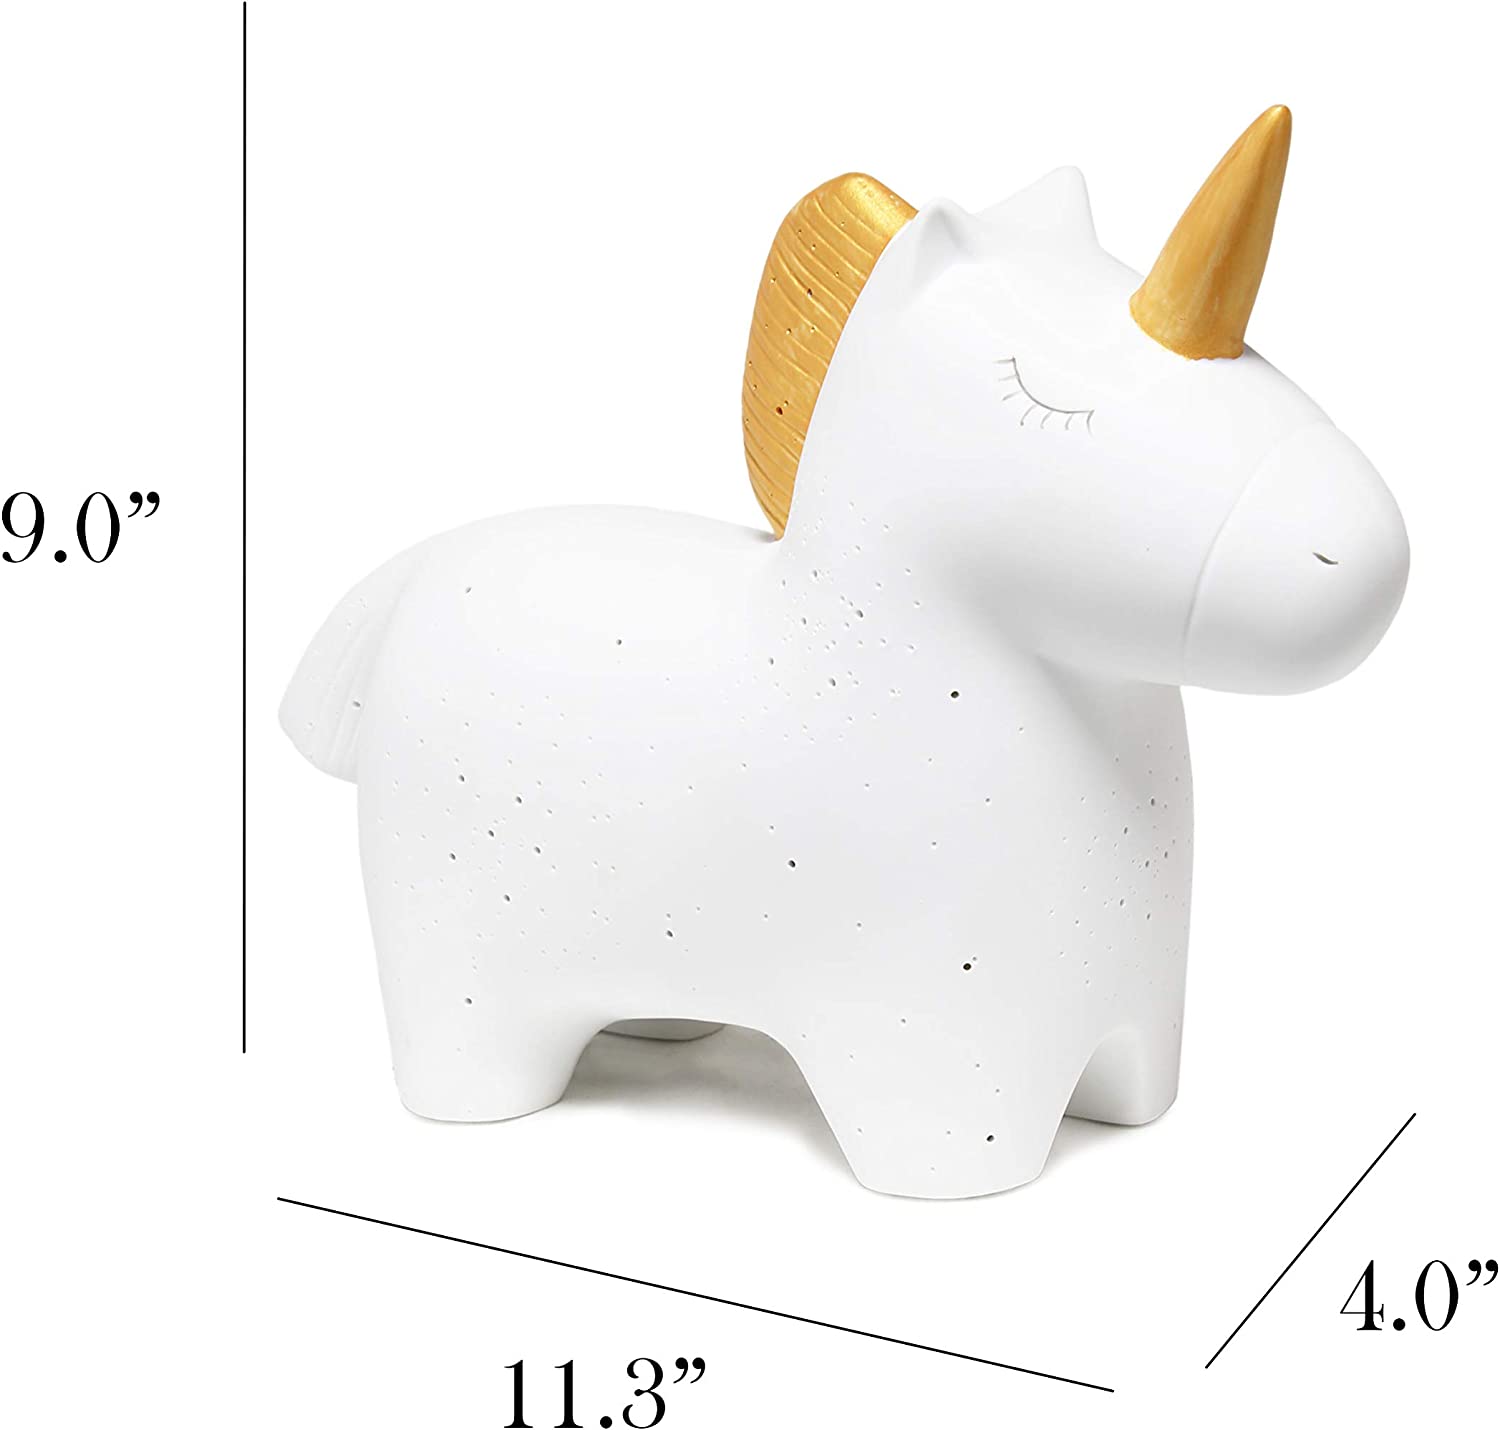 Simple Designs Gold and White Porcelain Fun Shaped Night Light Table Lamp, Unicorn